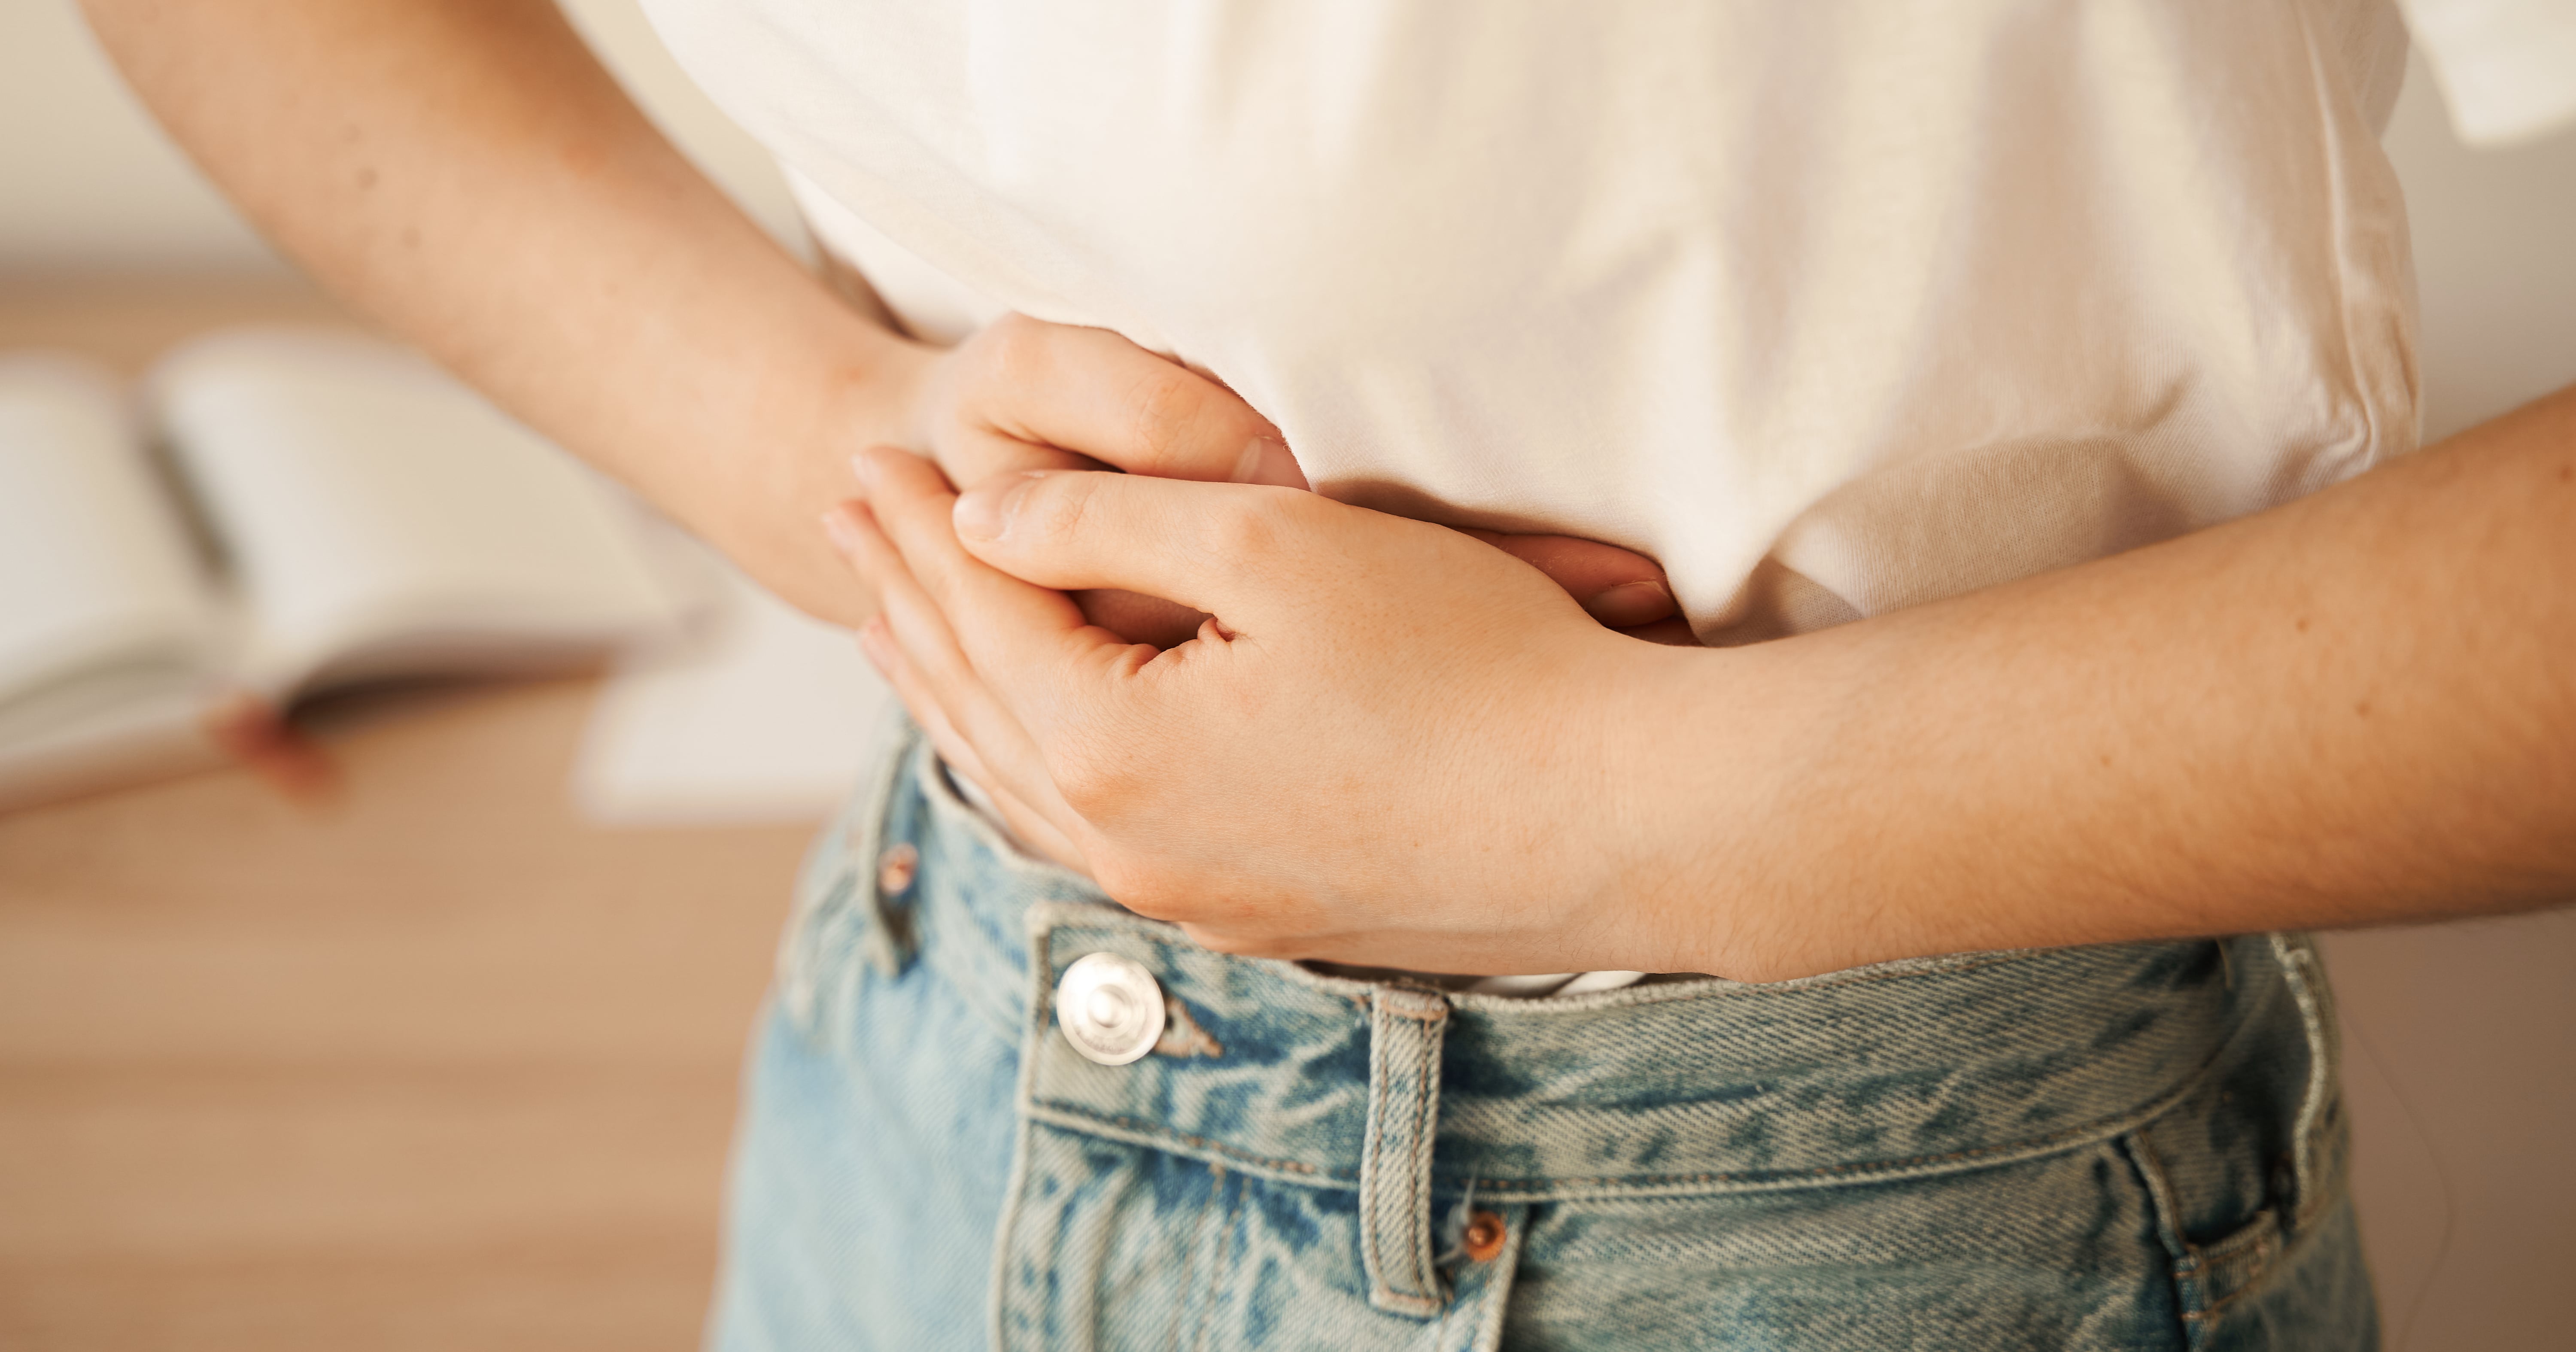 8 Ways to Reduce Bloating Fast, According to GI Doctors